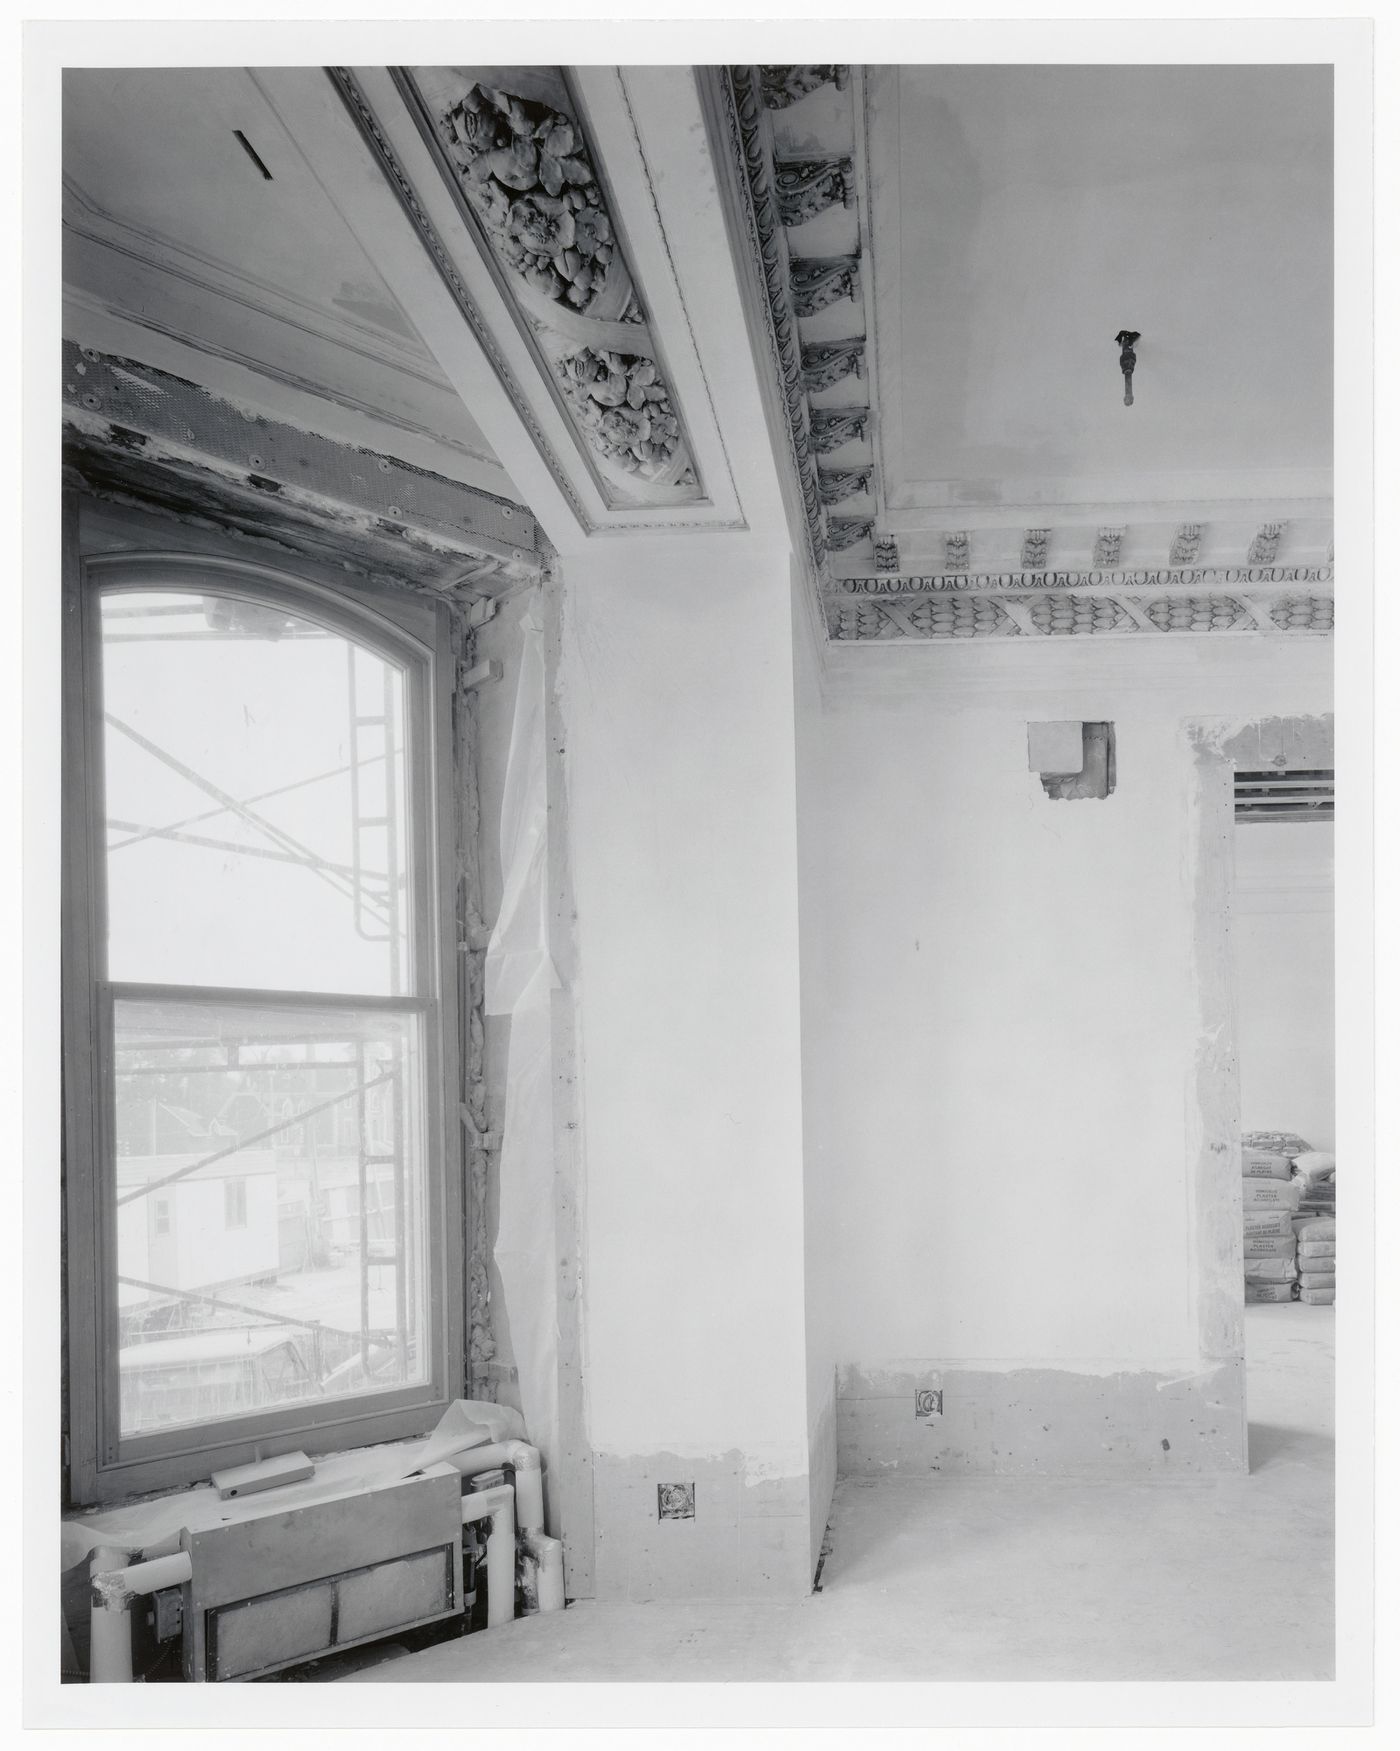 Interior view of a reception room showing a construction workers' trailer through the window, Shaughnessy House under renovation, Montréal, Québec